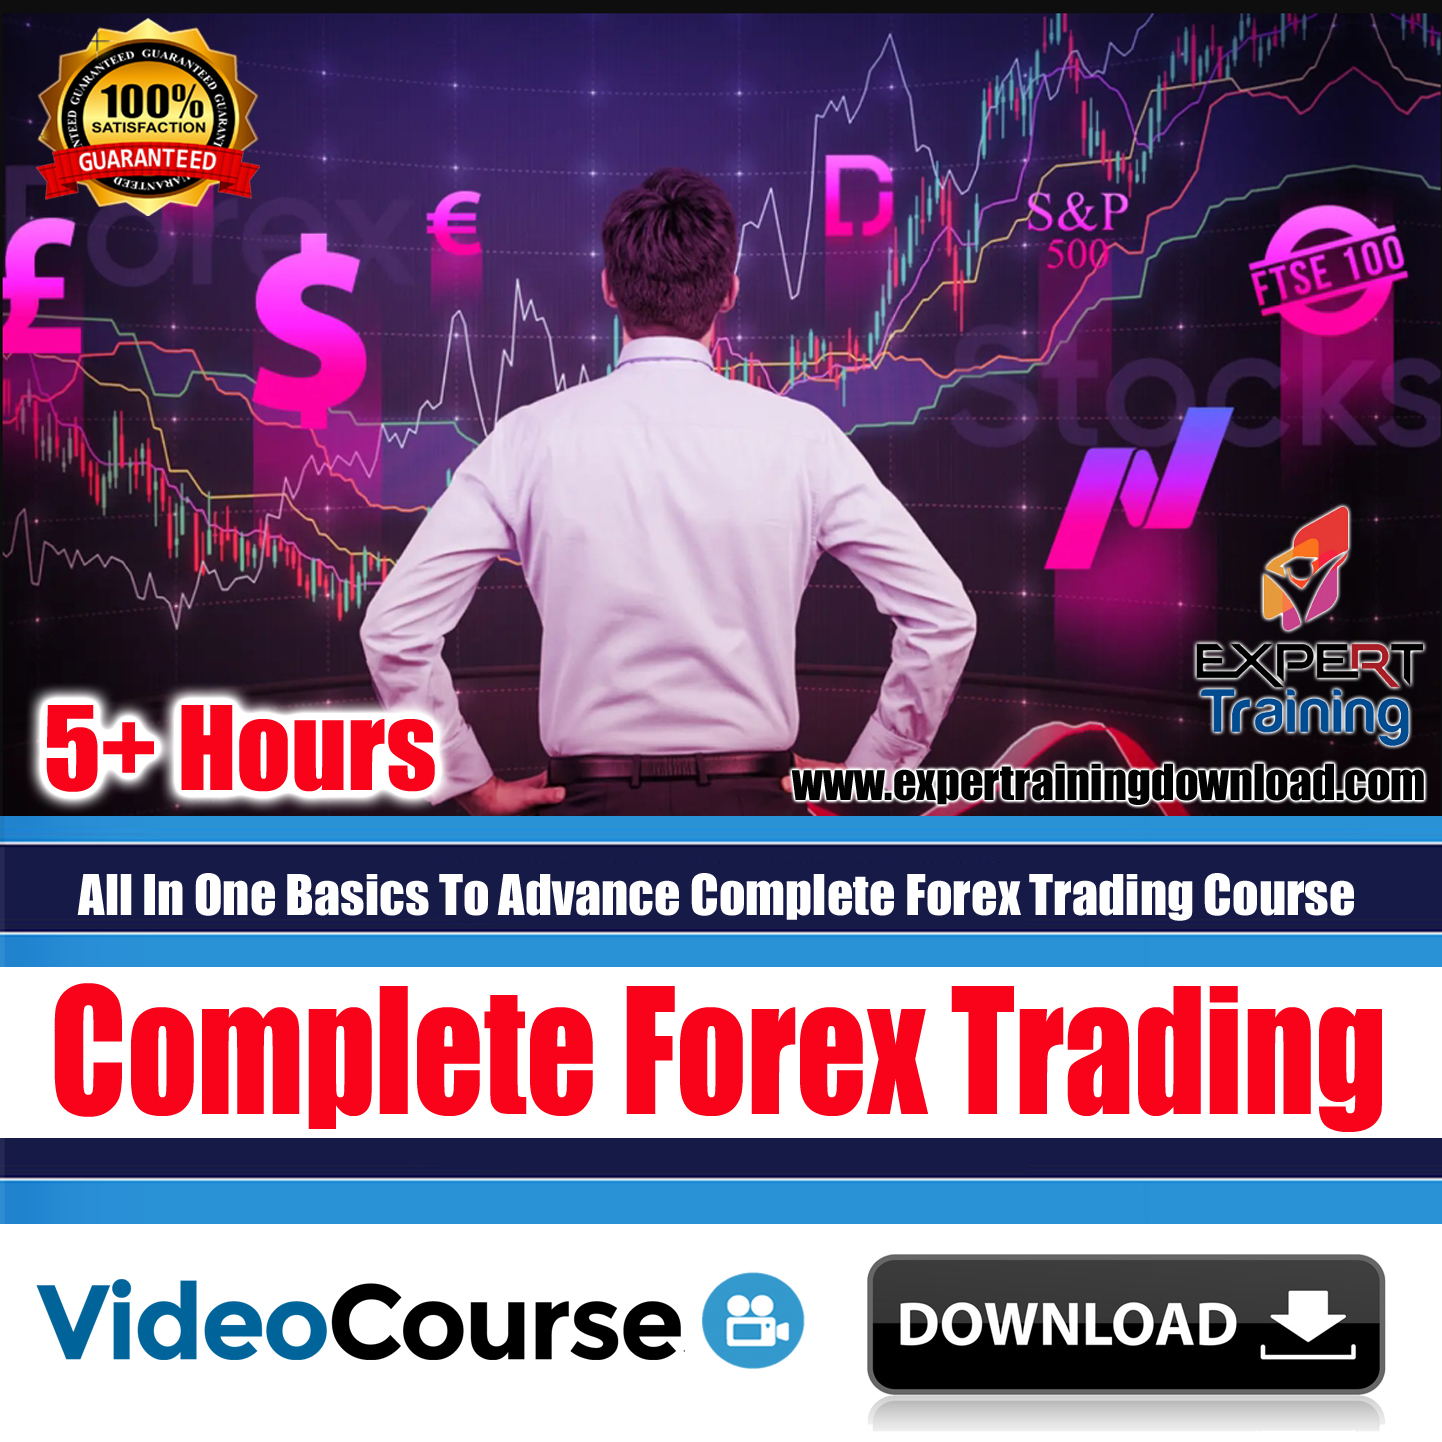 All In One Basics To Advance Complete Forex Trading Course